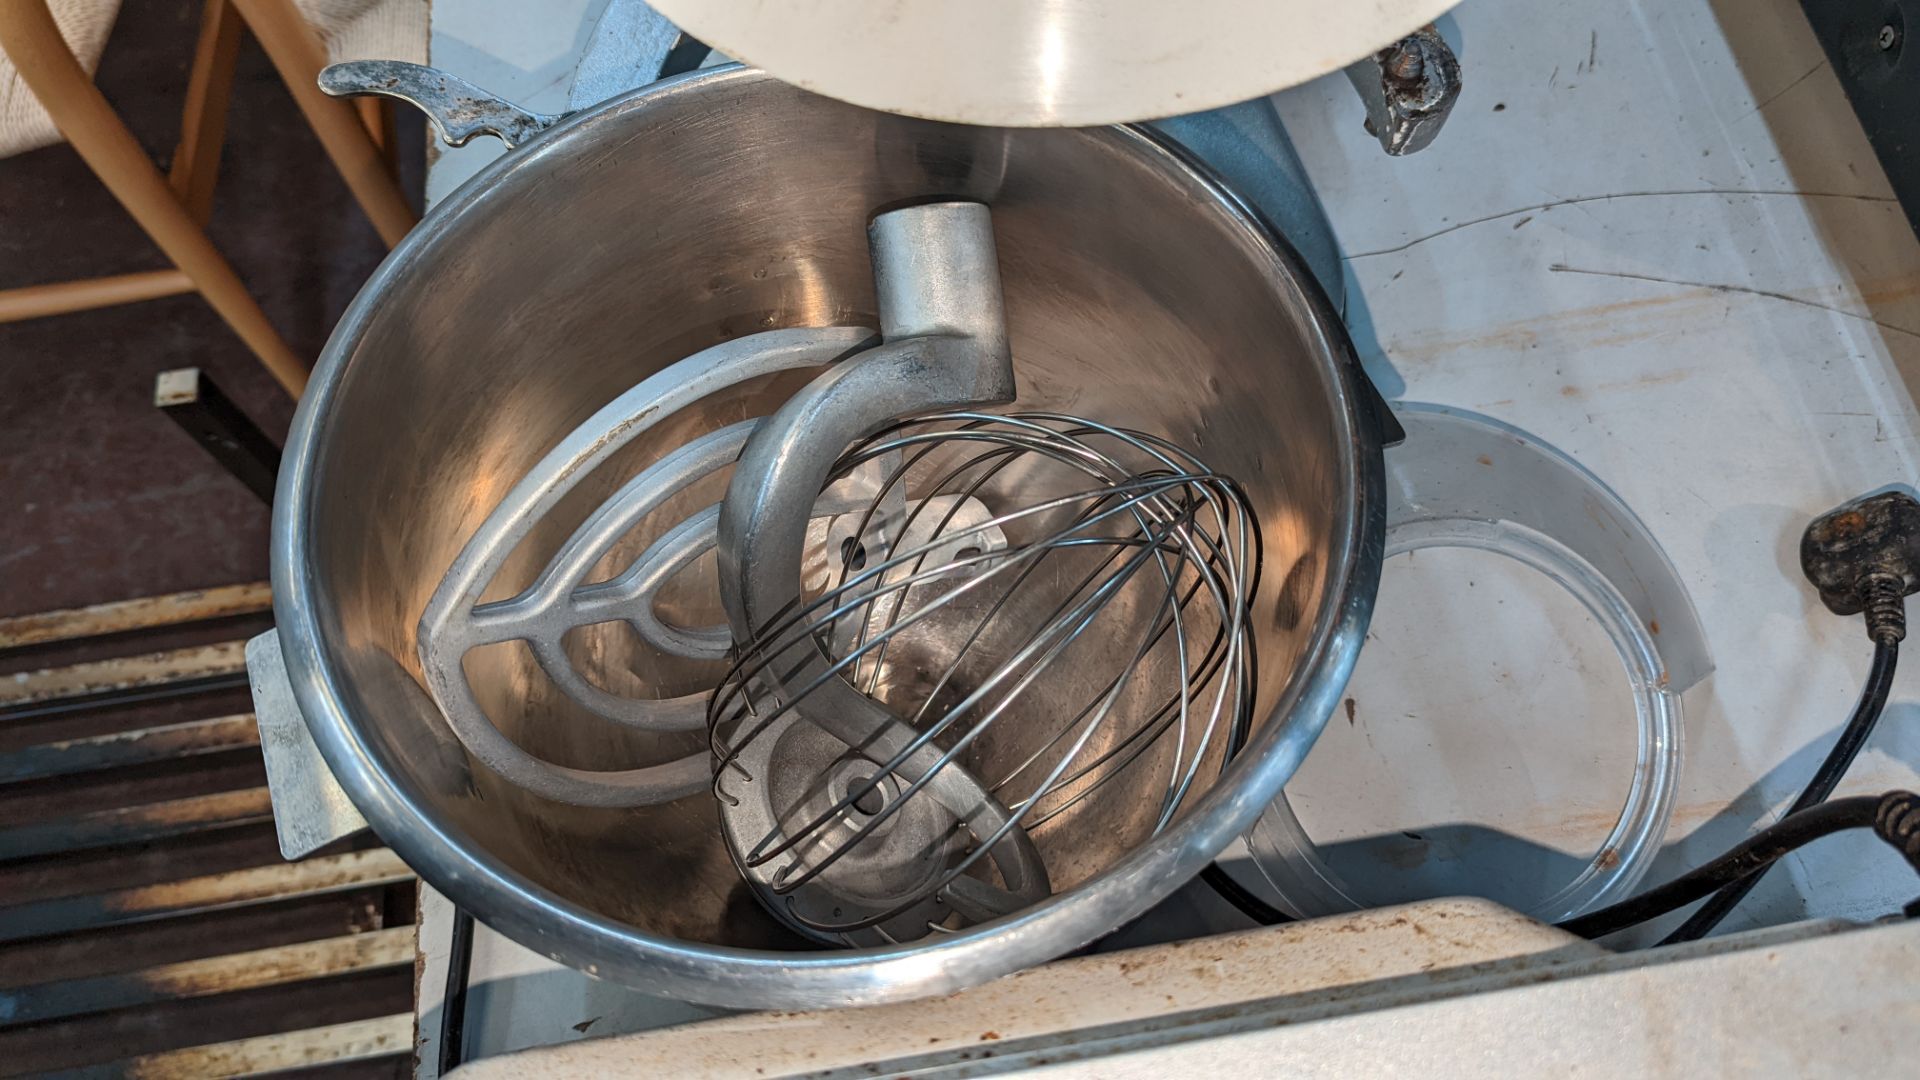 Vollrath heavy-duty mixer with removable bowl & 3 assorted attachments (whisk, paddle & hook) - Image 8 of 8